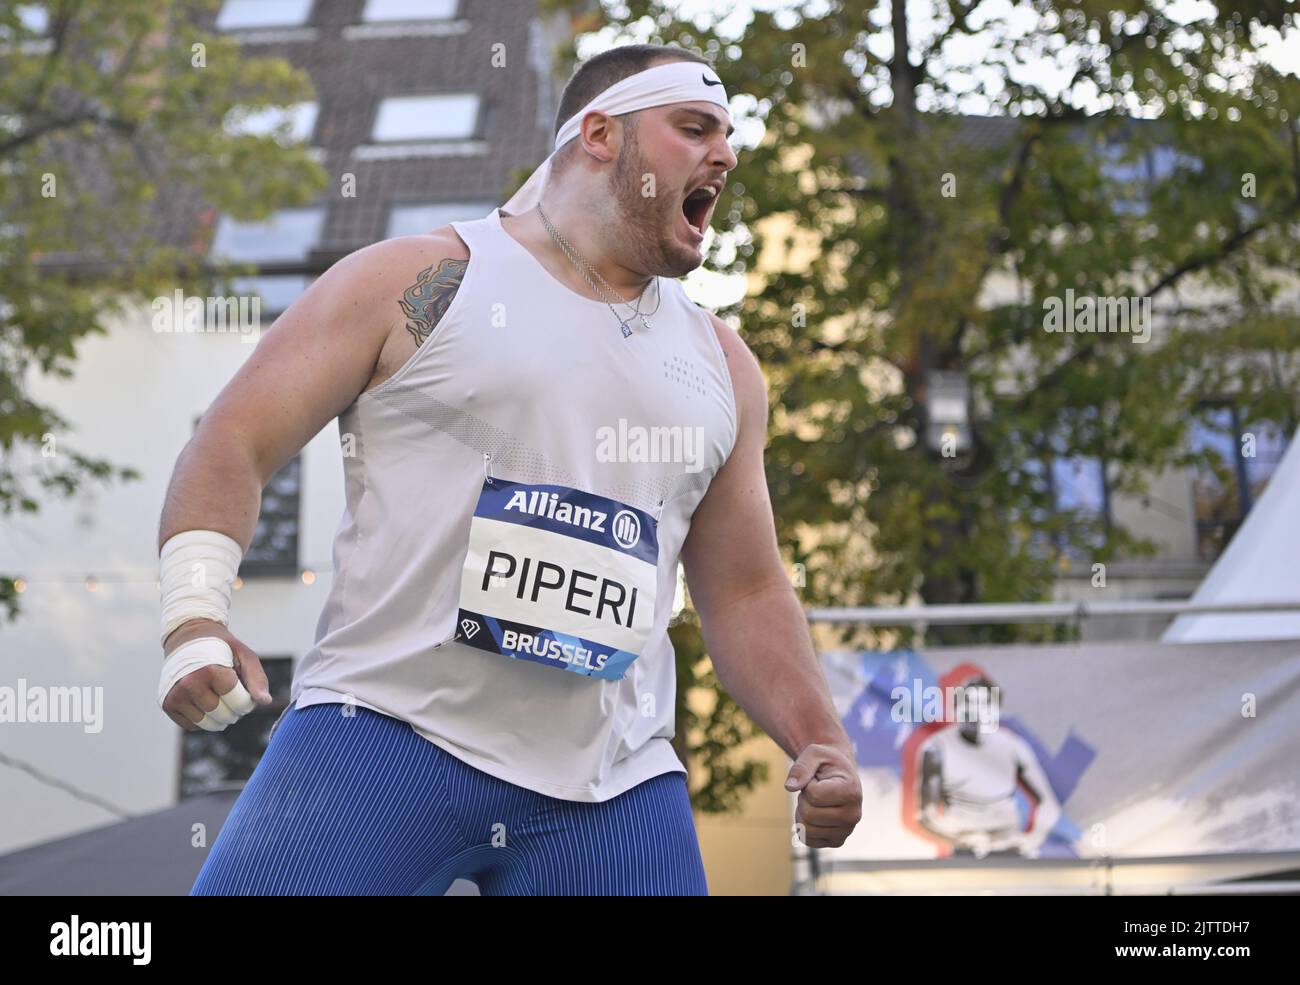 US' Adrian Piperi reacts during the shot put competition on the eve of the Memorial Van Damme Diamond League meeting athletics event, in Brussels, Thursday 01 September 2022. The Diamond League meeting takes place on 02 September. BELGA PHOTO ERIC LALMAND Stock Photo